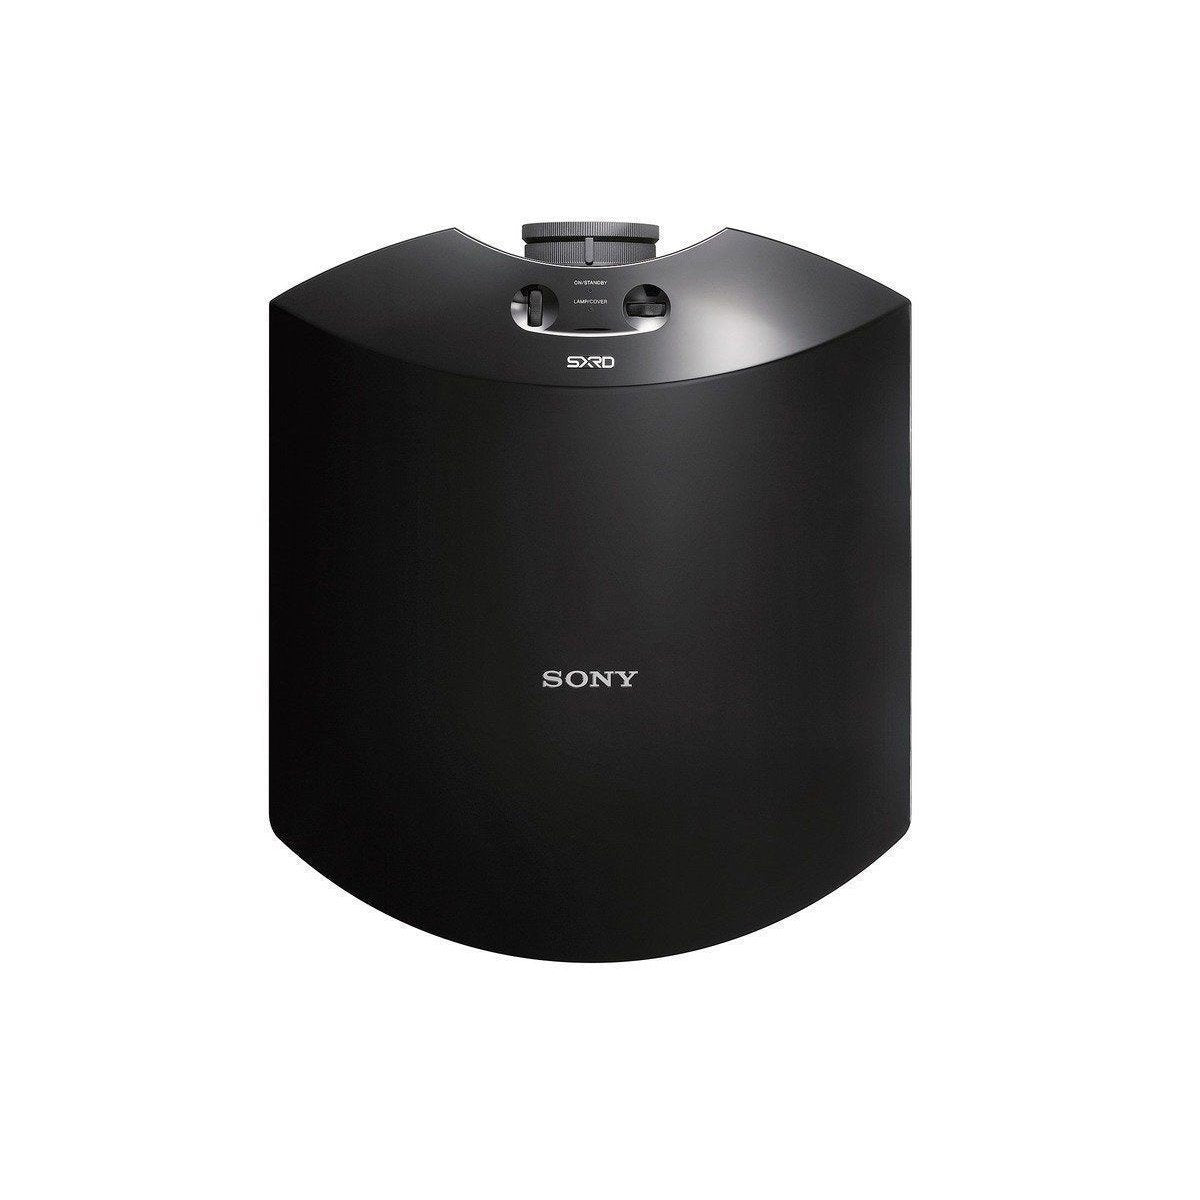 Sony VPLHW45ES 1080p 3D SXRD Home Theater/Gaming Projector